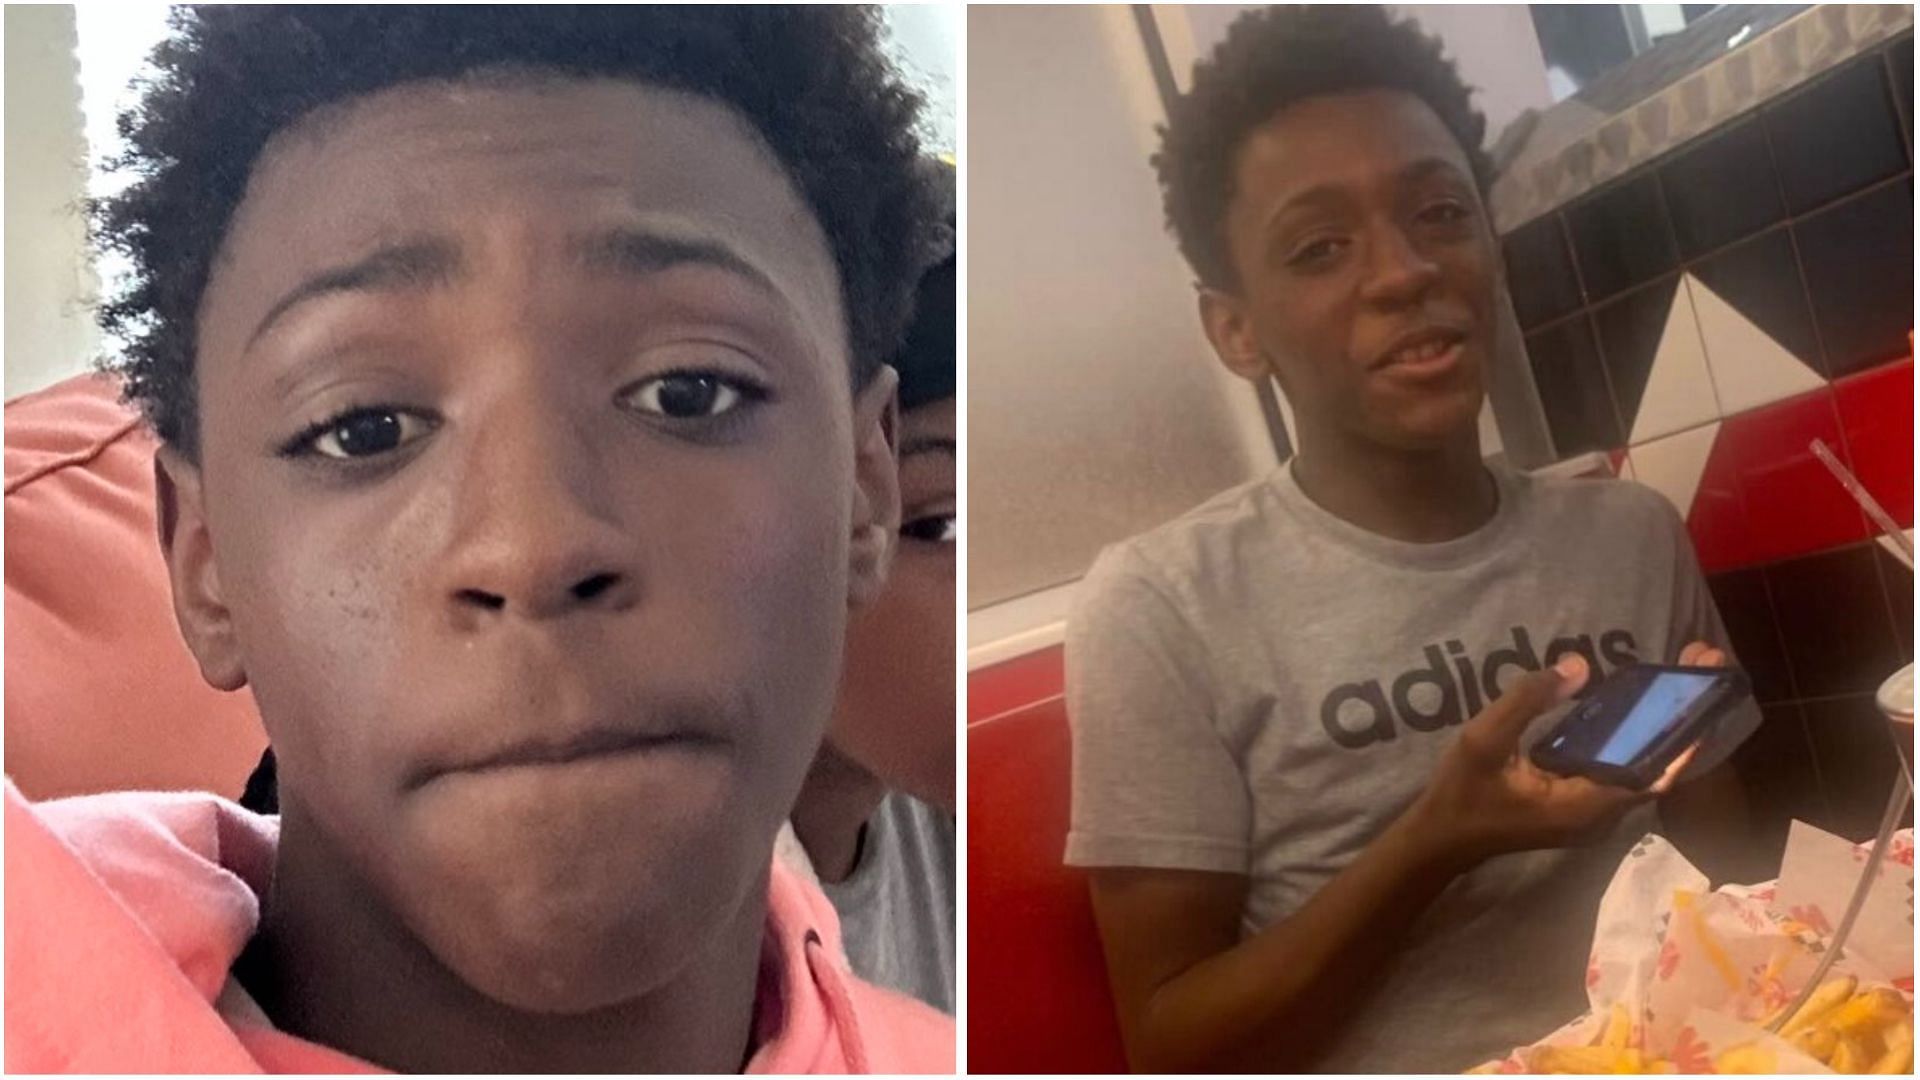 Philadelphia family mourns the loss of 13-year-old Jeremiah Wilcox (Images via Twitter)